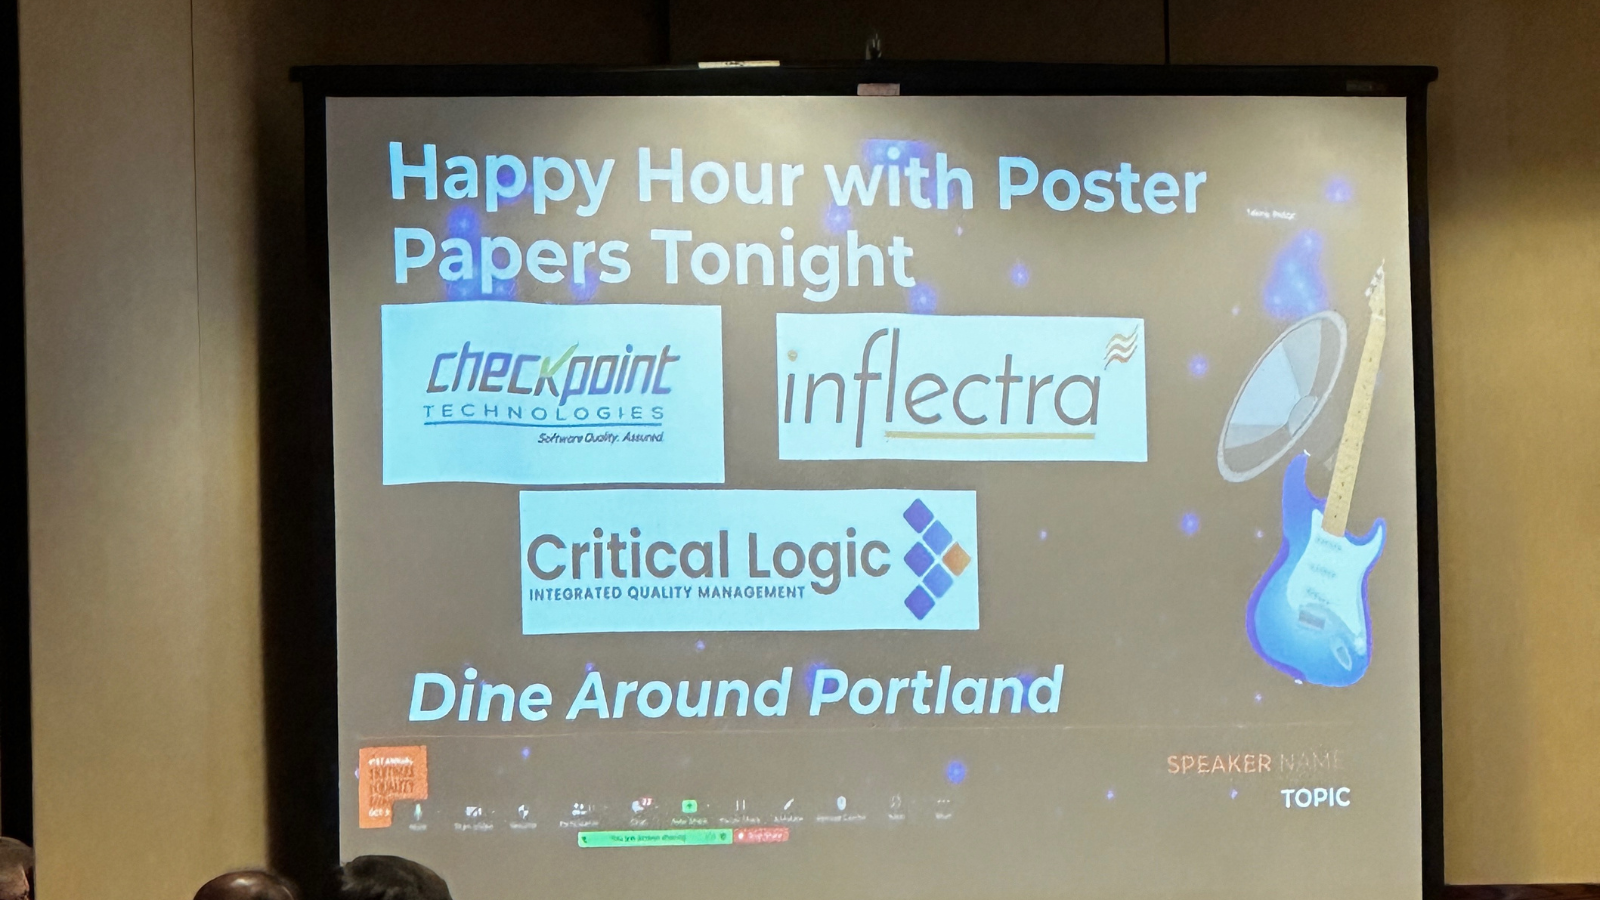 inflectra-checkpoint-technologies-and-critical-logic-host-happy-hour-after-pnsqc-image